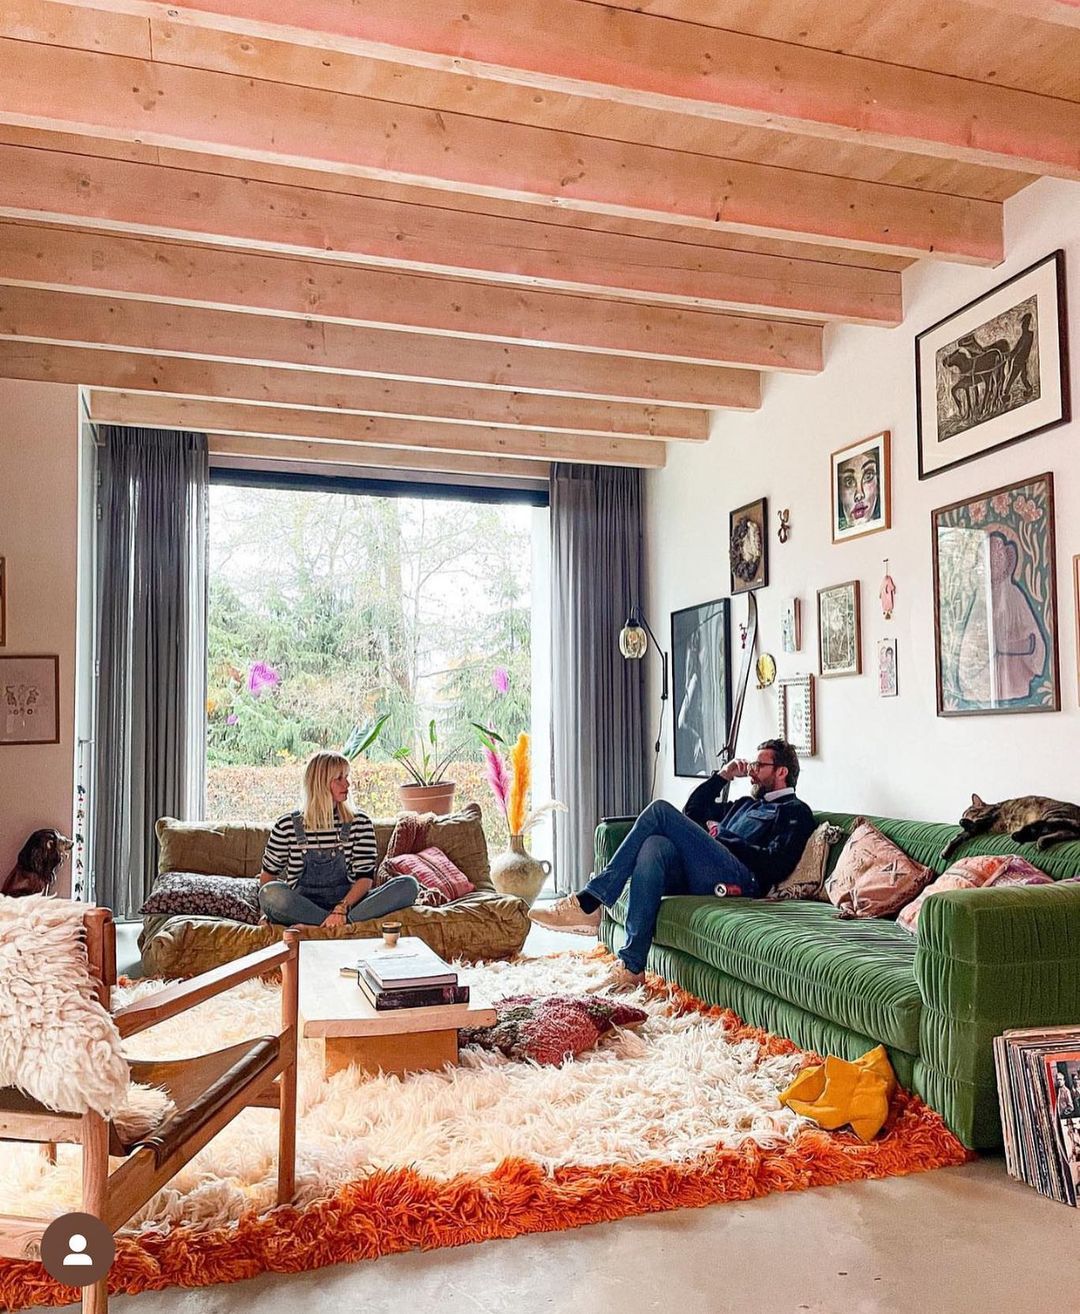 two people chatting in an open living room with green couch and orange rug. Photo by Instagram user @houseoforange